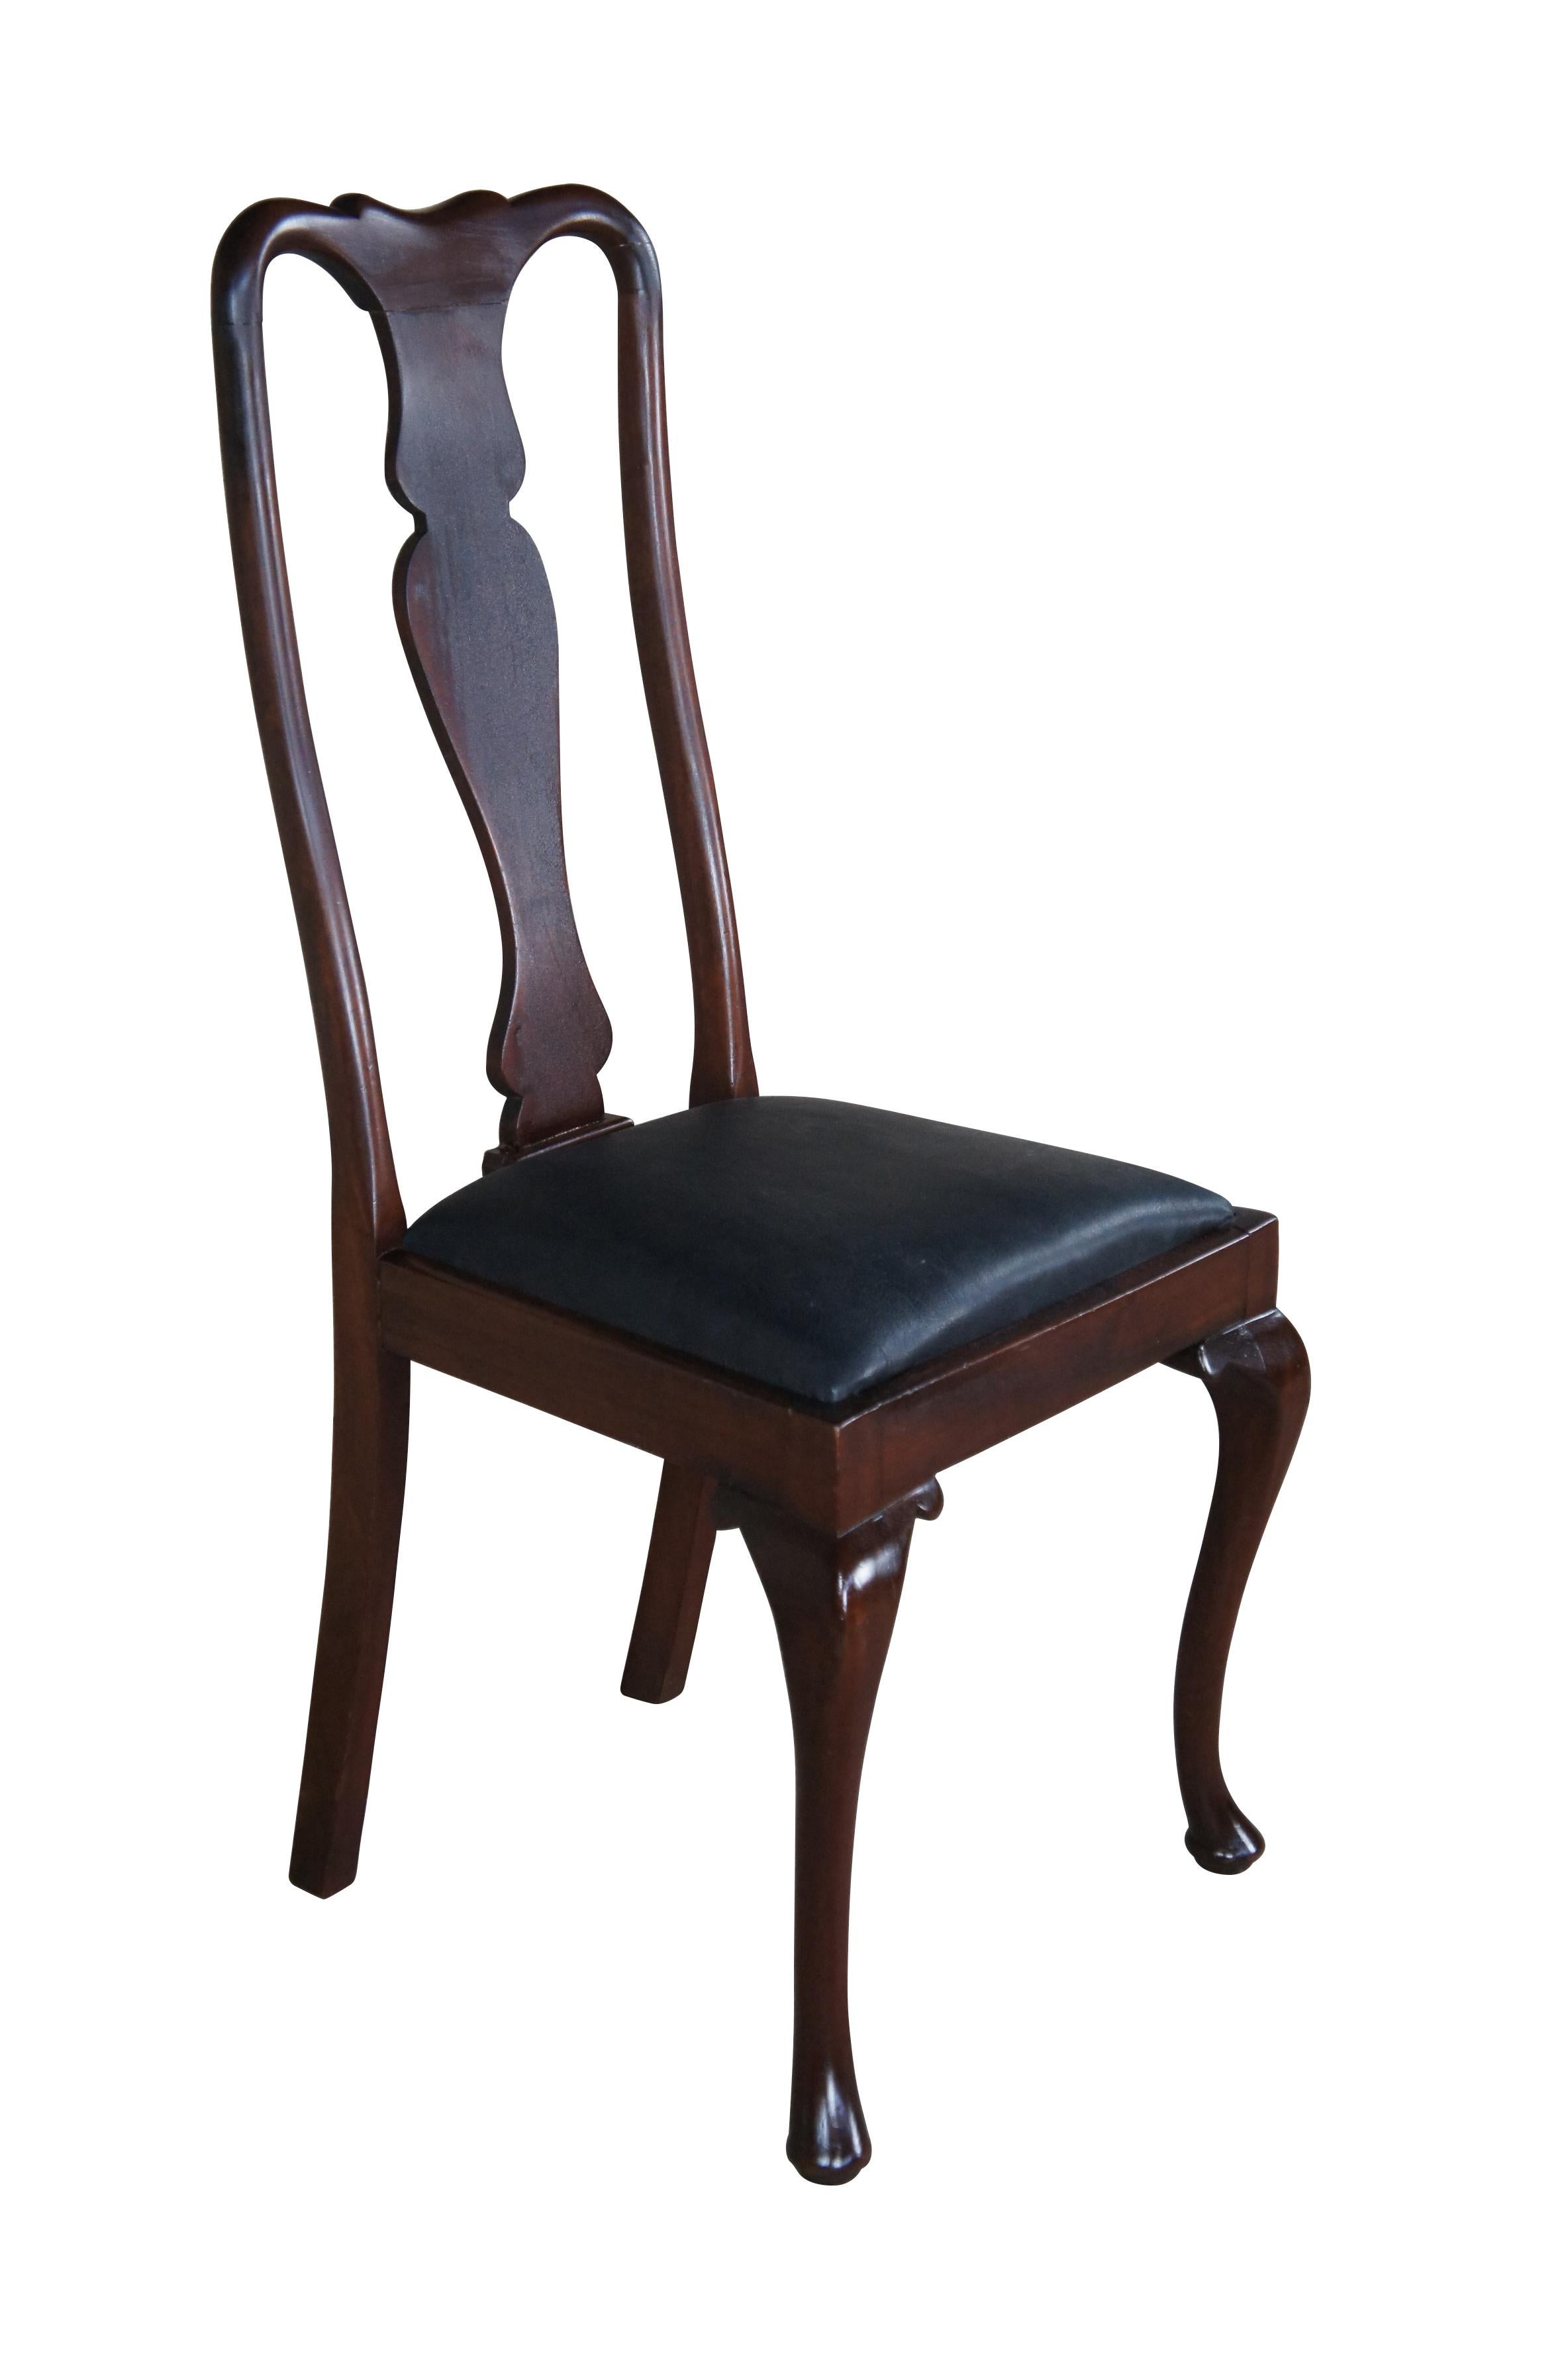 Antique Queen Anne Mahogany Black Deerskin Leather High Back Dining Desk Chair  In Good Condition For Sale In Dayton, OH